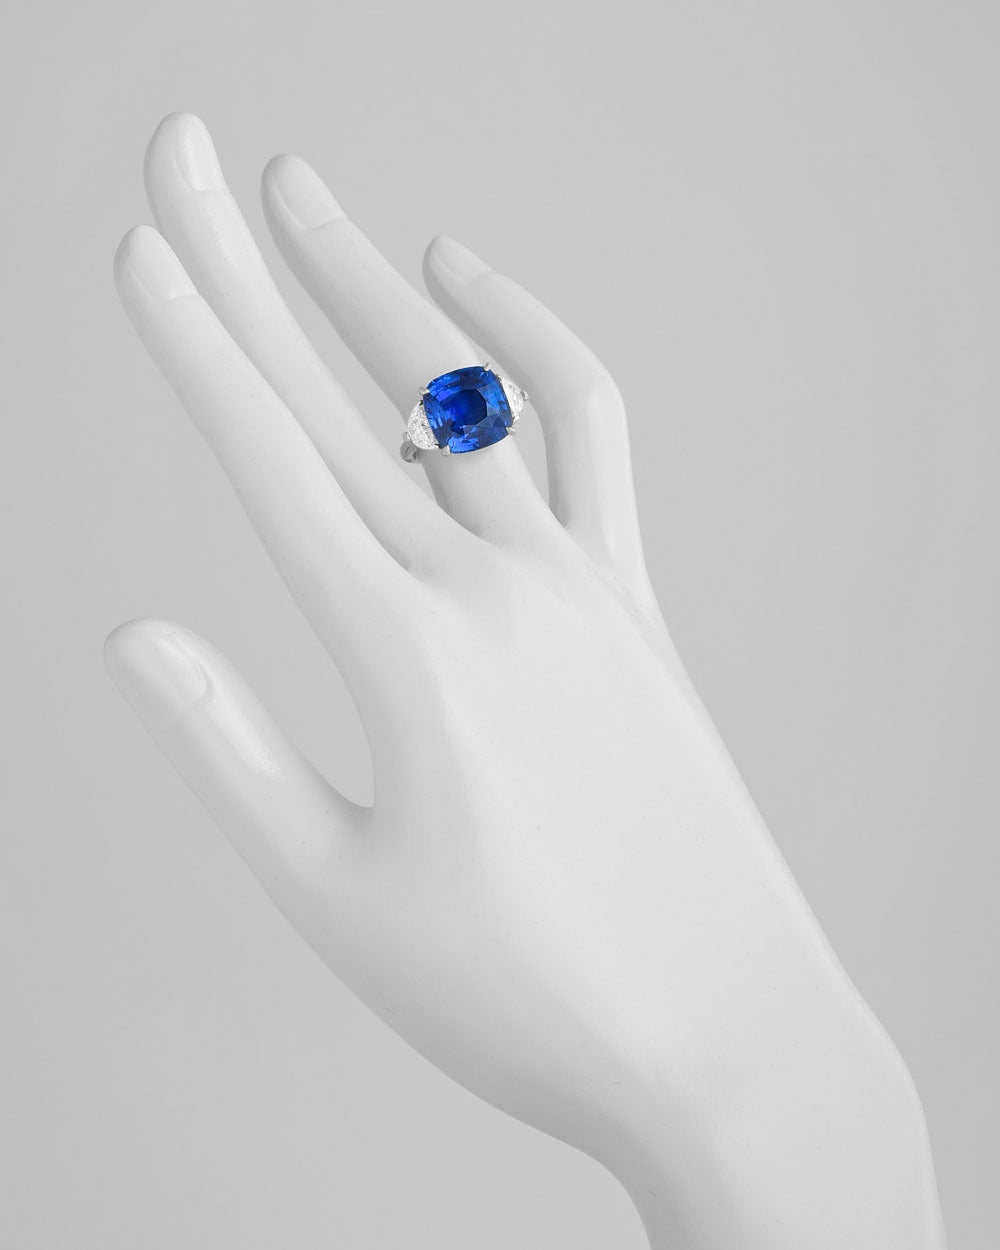 Ceylon sapphire and diamond ring, centering on a natural cushion-shaped sapphire weighing 10.59 carats, flanked by two near-colorless half moon-shaped diamonds, mounted in platinum. Accompanied by lab certificates from both the AGL and GRS for the